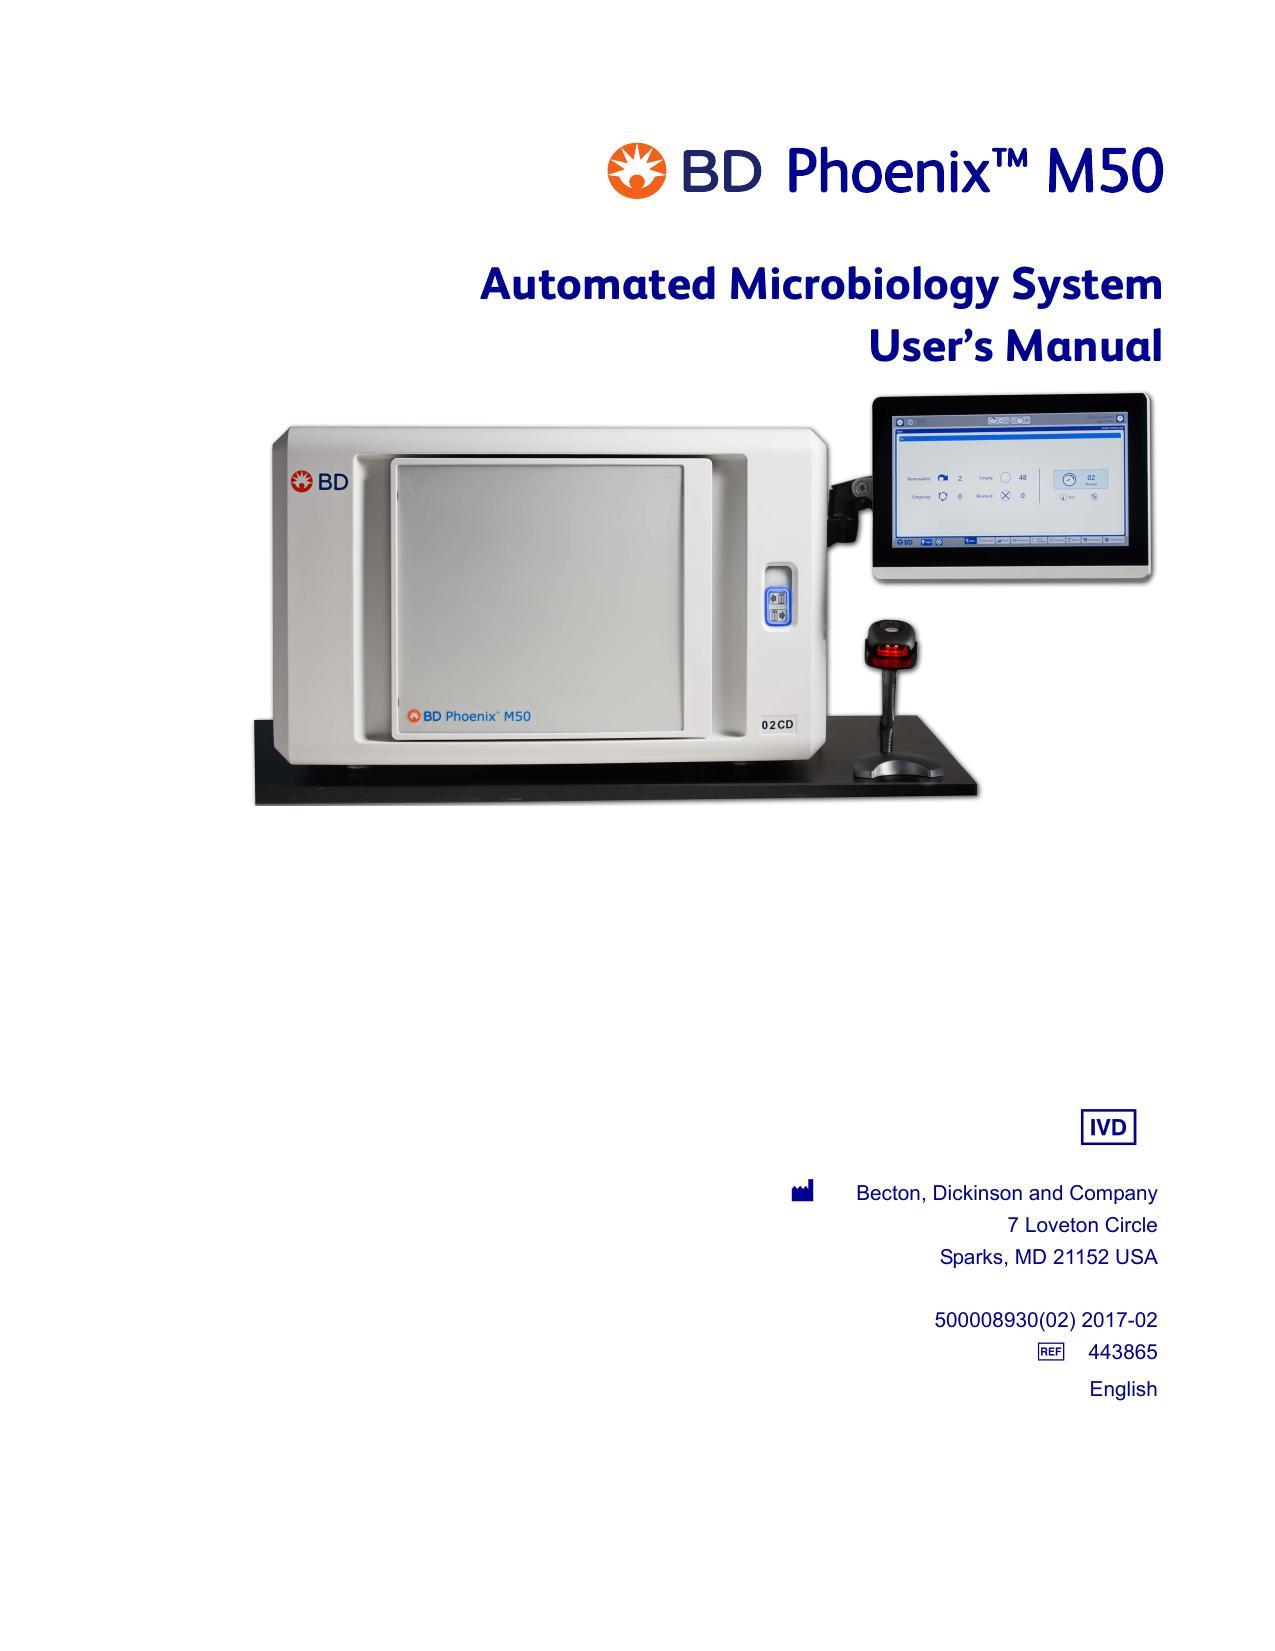 bd-phoenix-mso-automated-microbiology-system-users-manual.pdf